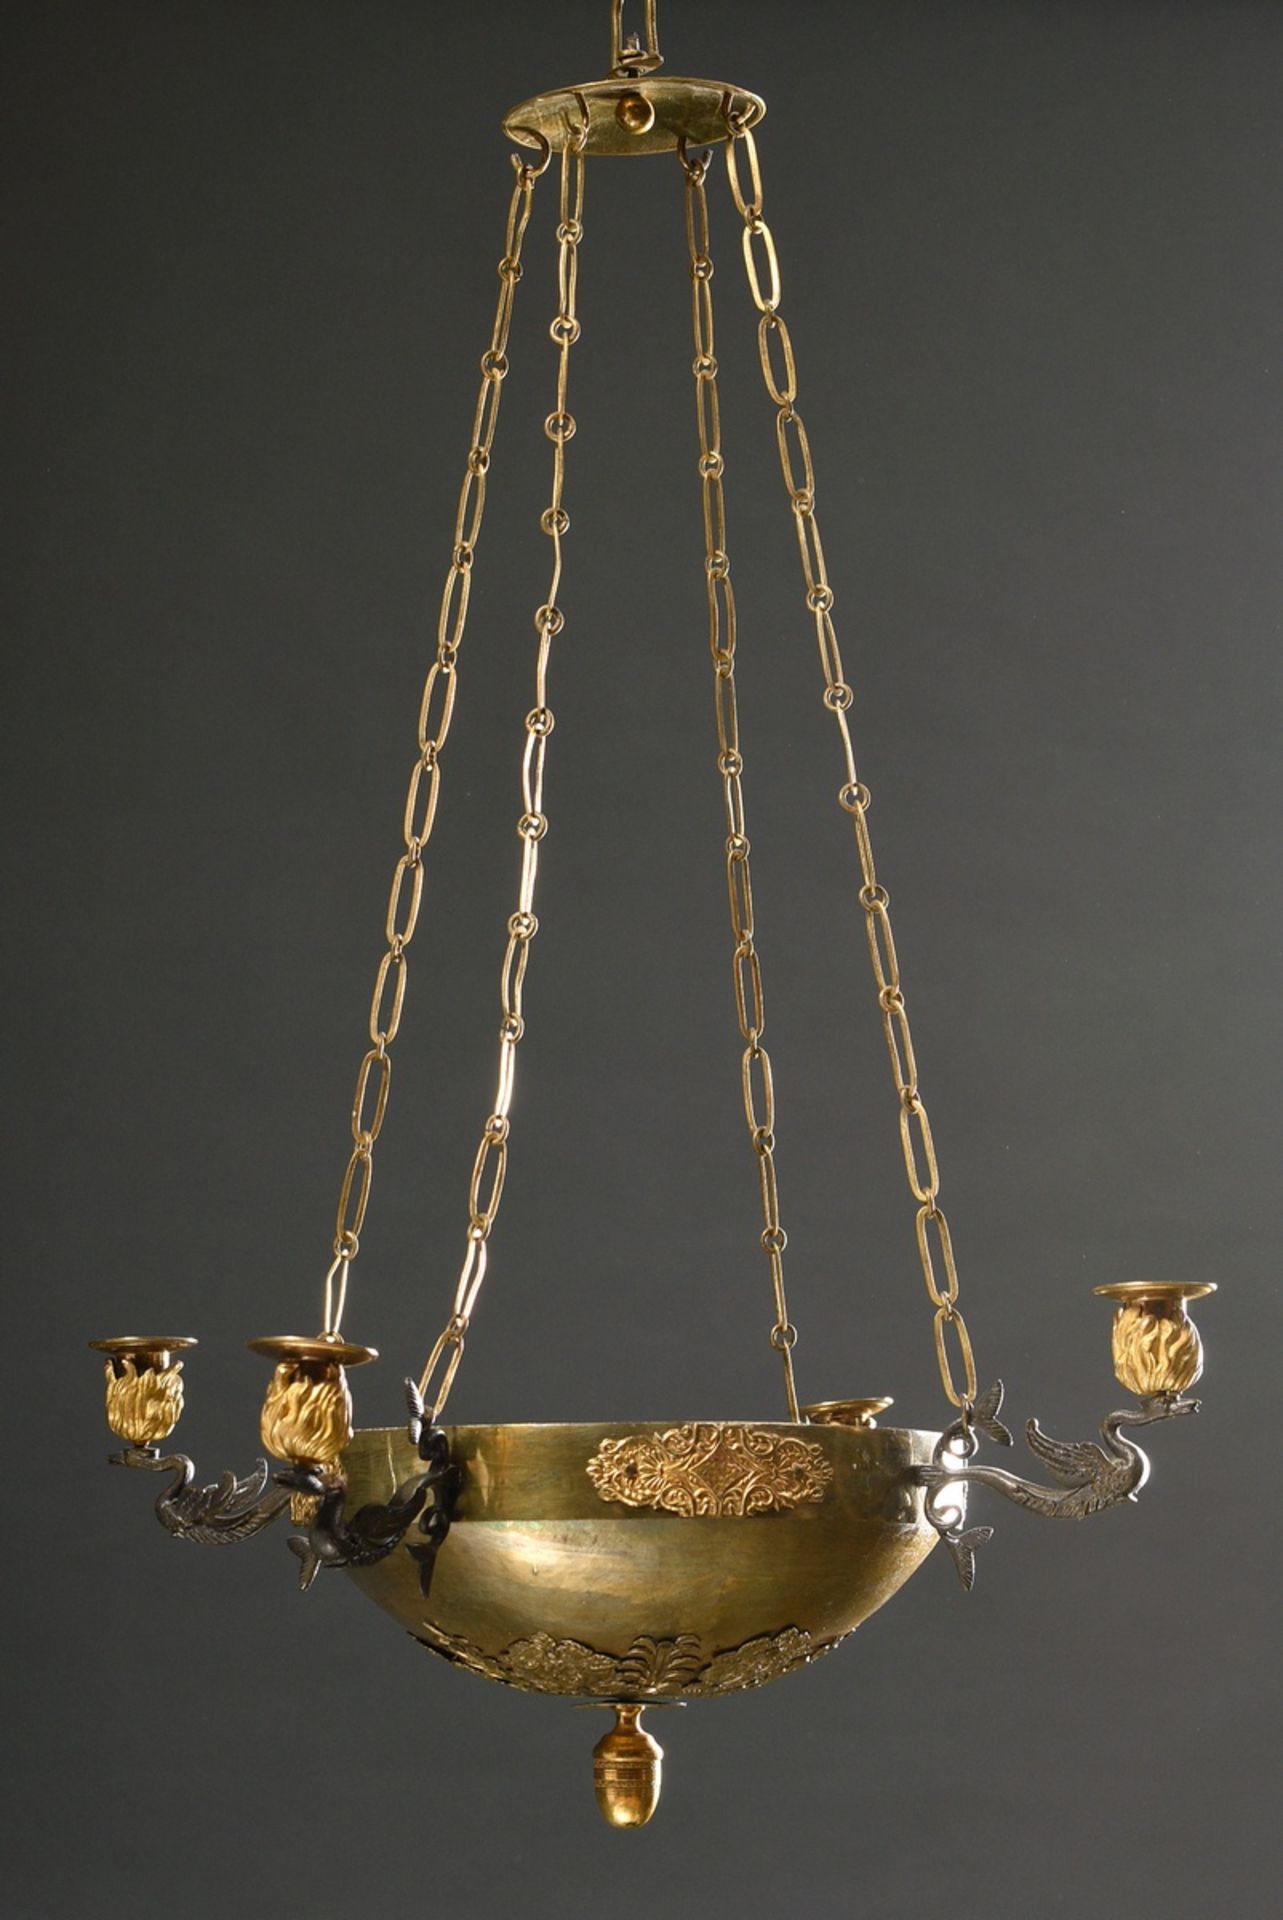 Brass ceiling lamp in Empire style with 4 chandelier arms and chain suspension, Ø 48cm, h. 70cm